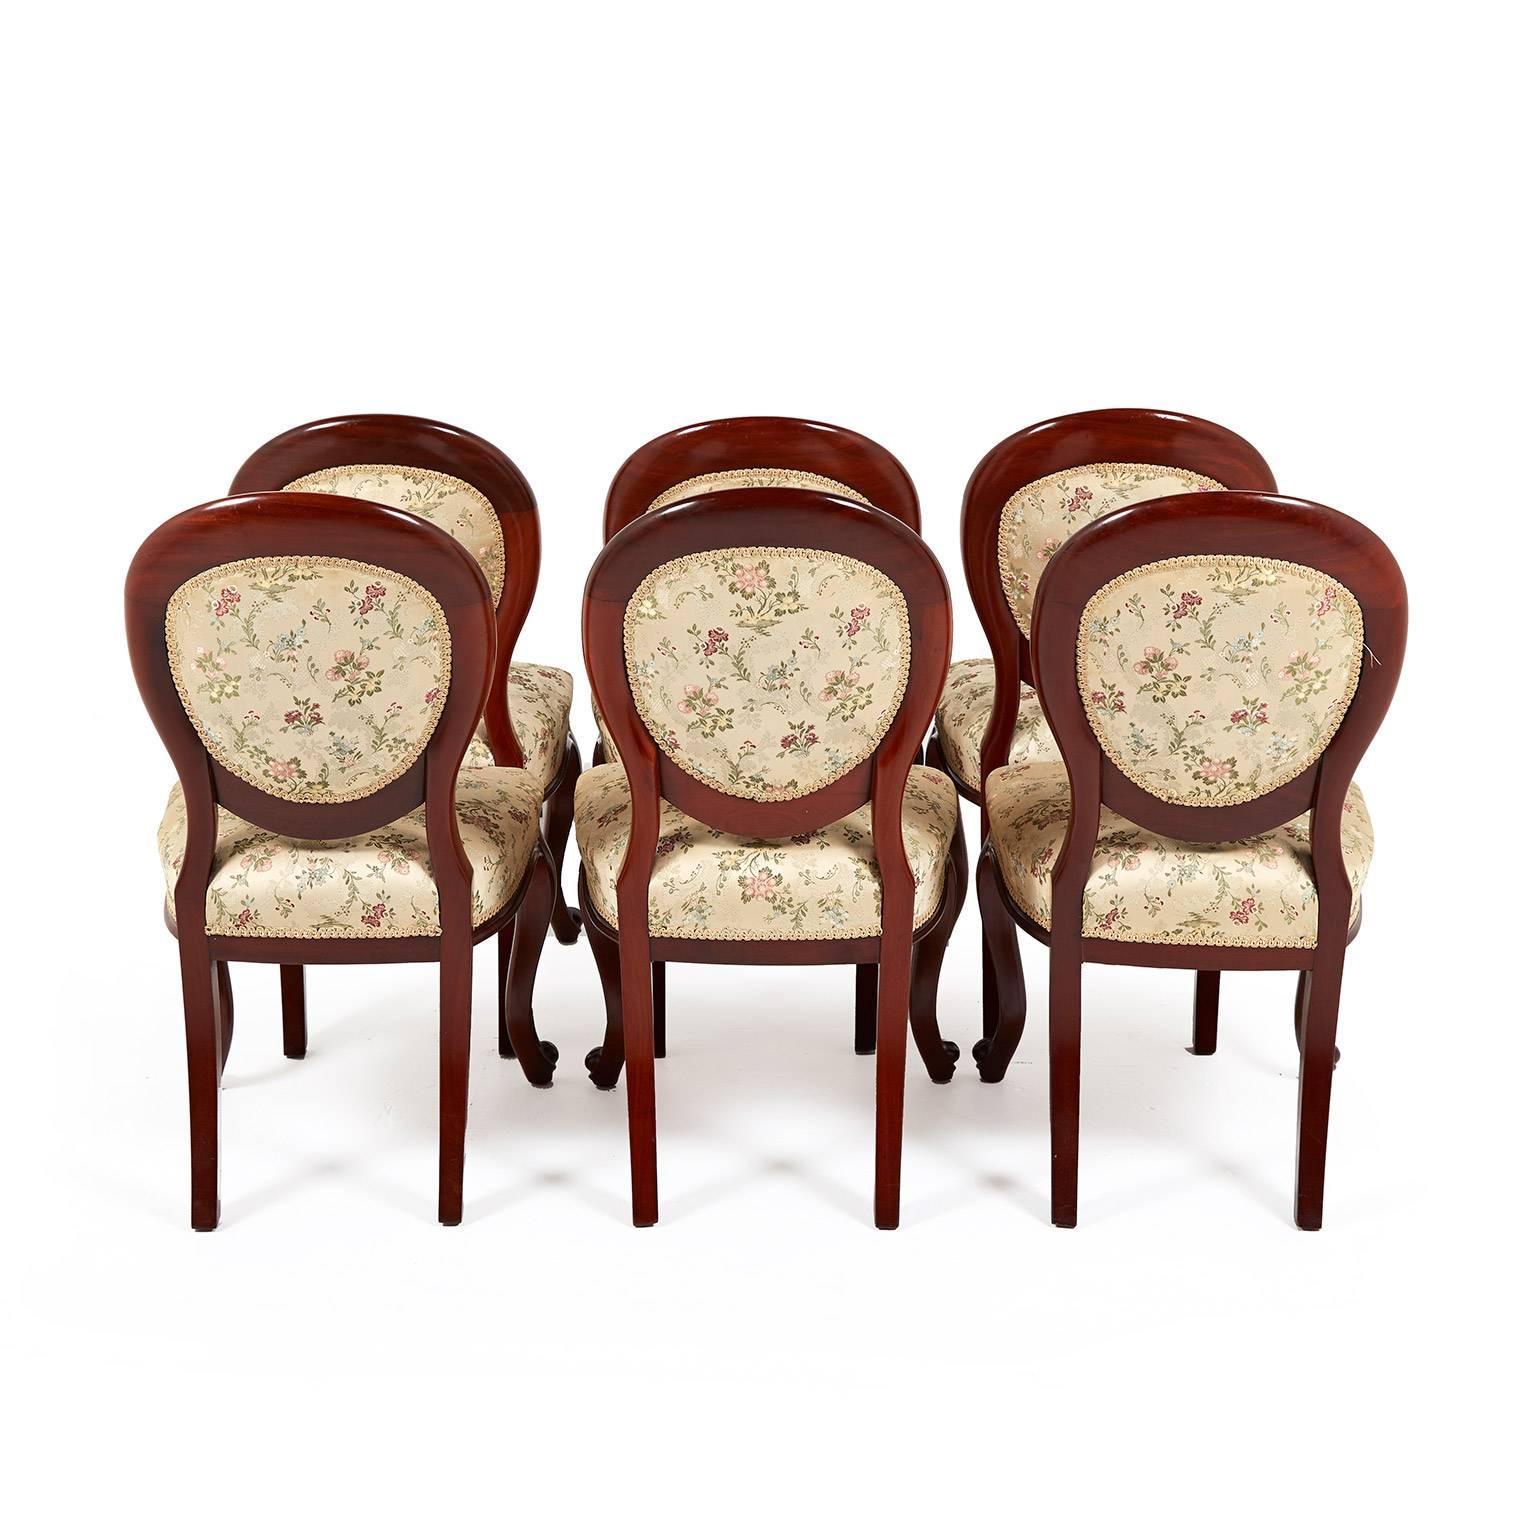 Antique set of six solid mahogany carved Victorian dining chairs, with upholstered cameo backs, circa 1870. Beautiful and functional, these chairs are solid and suitable for everyday use.



 